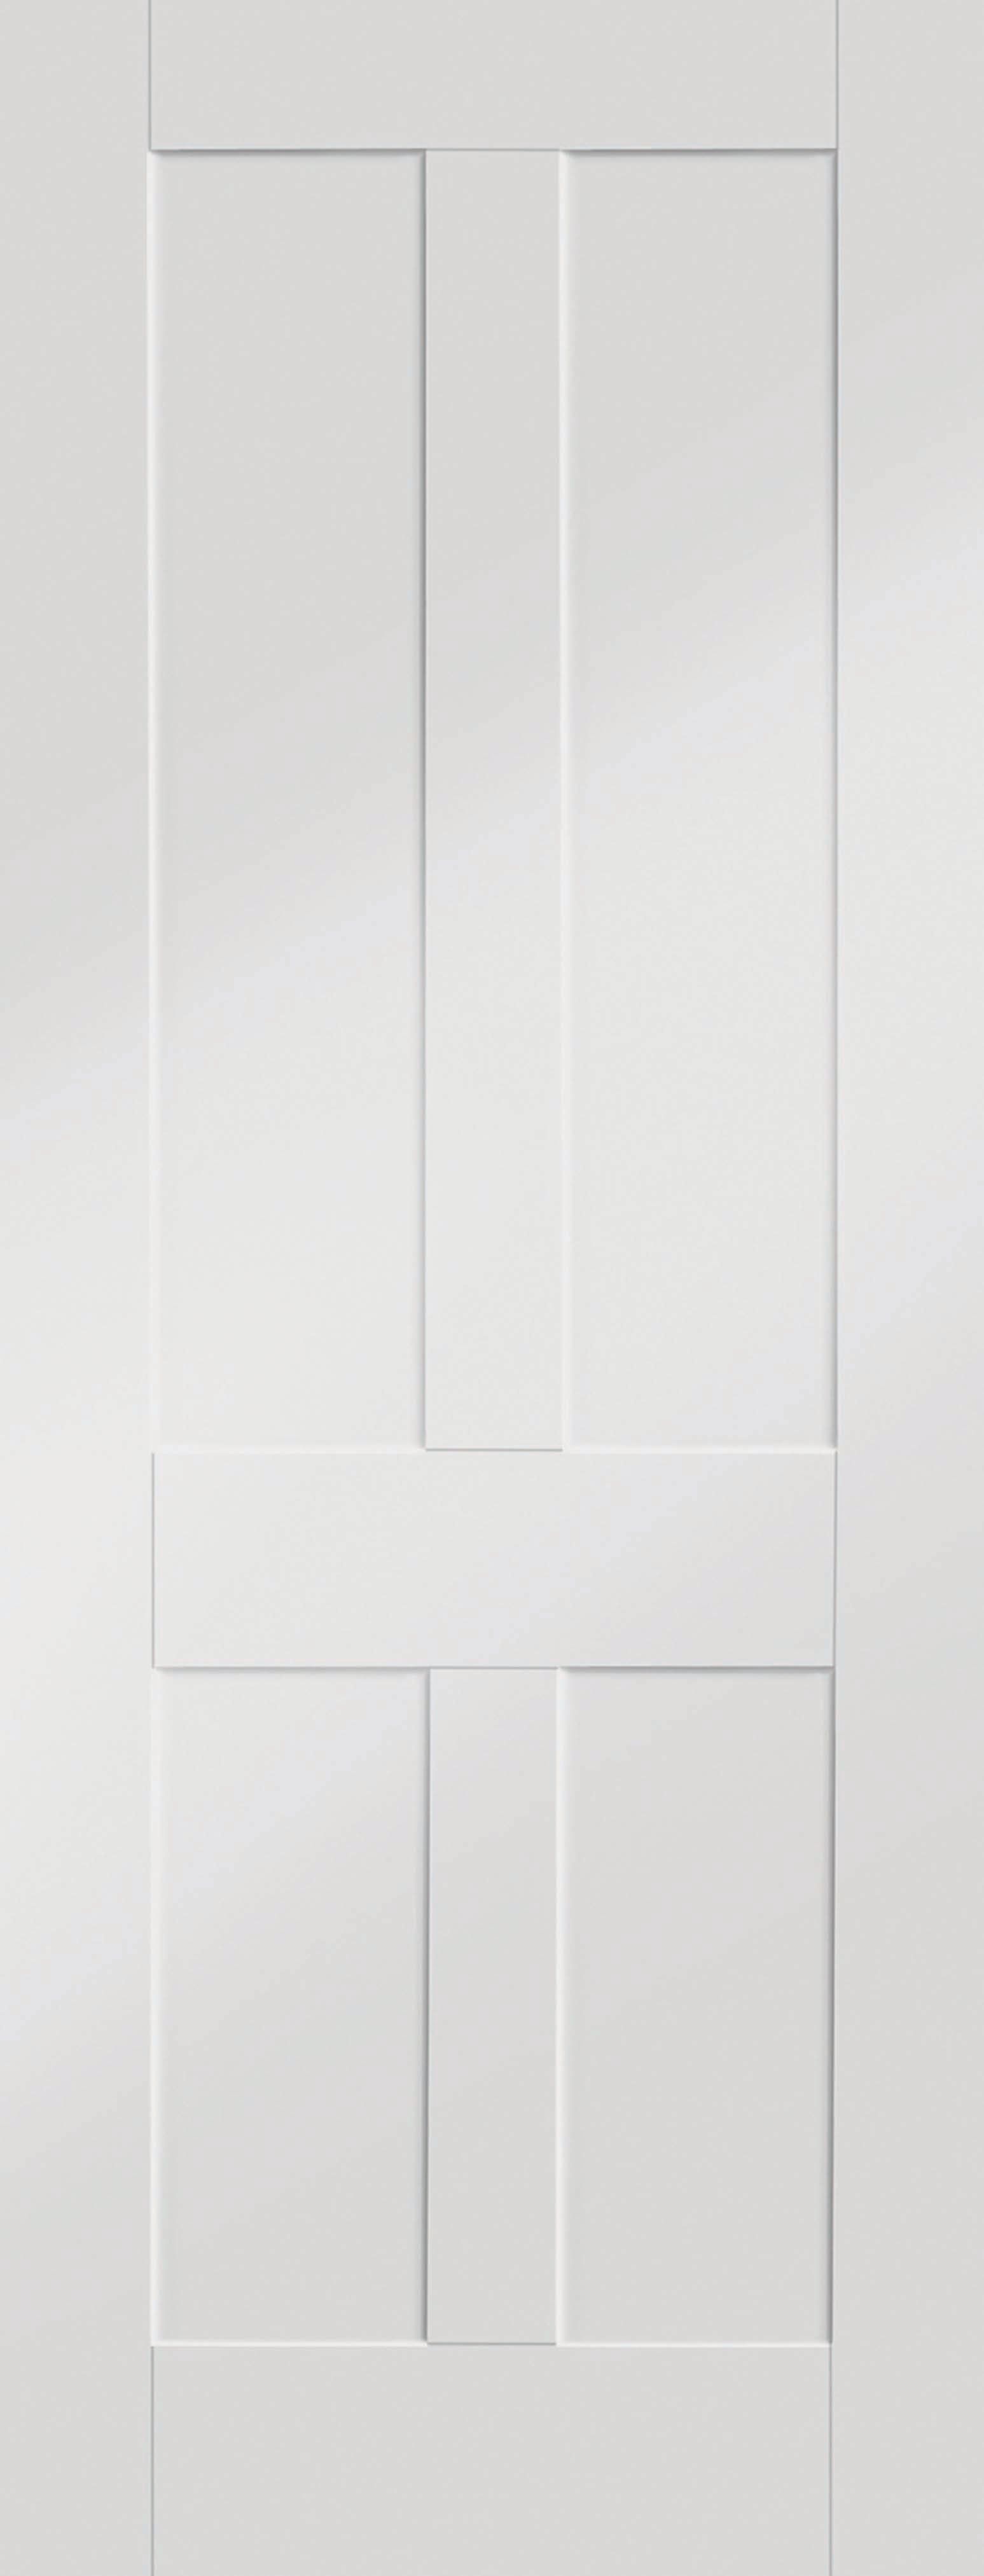 Image of XL Joinery Victorian/Malton White Softwood 4 Panel Internal Door - 1981 x 762mm